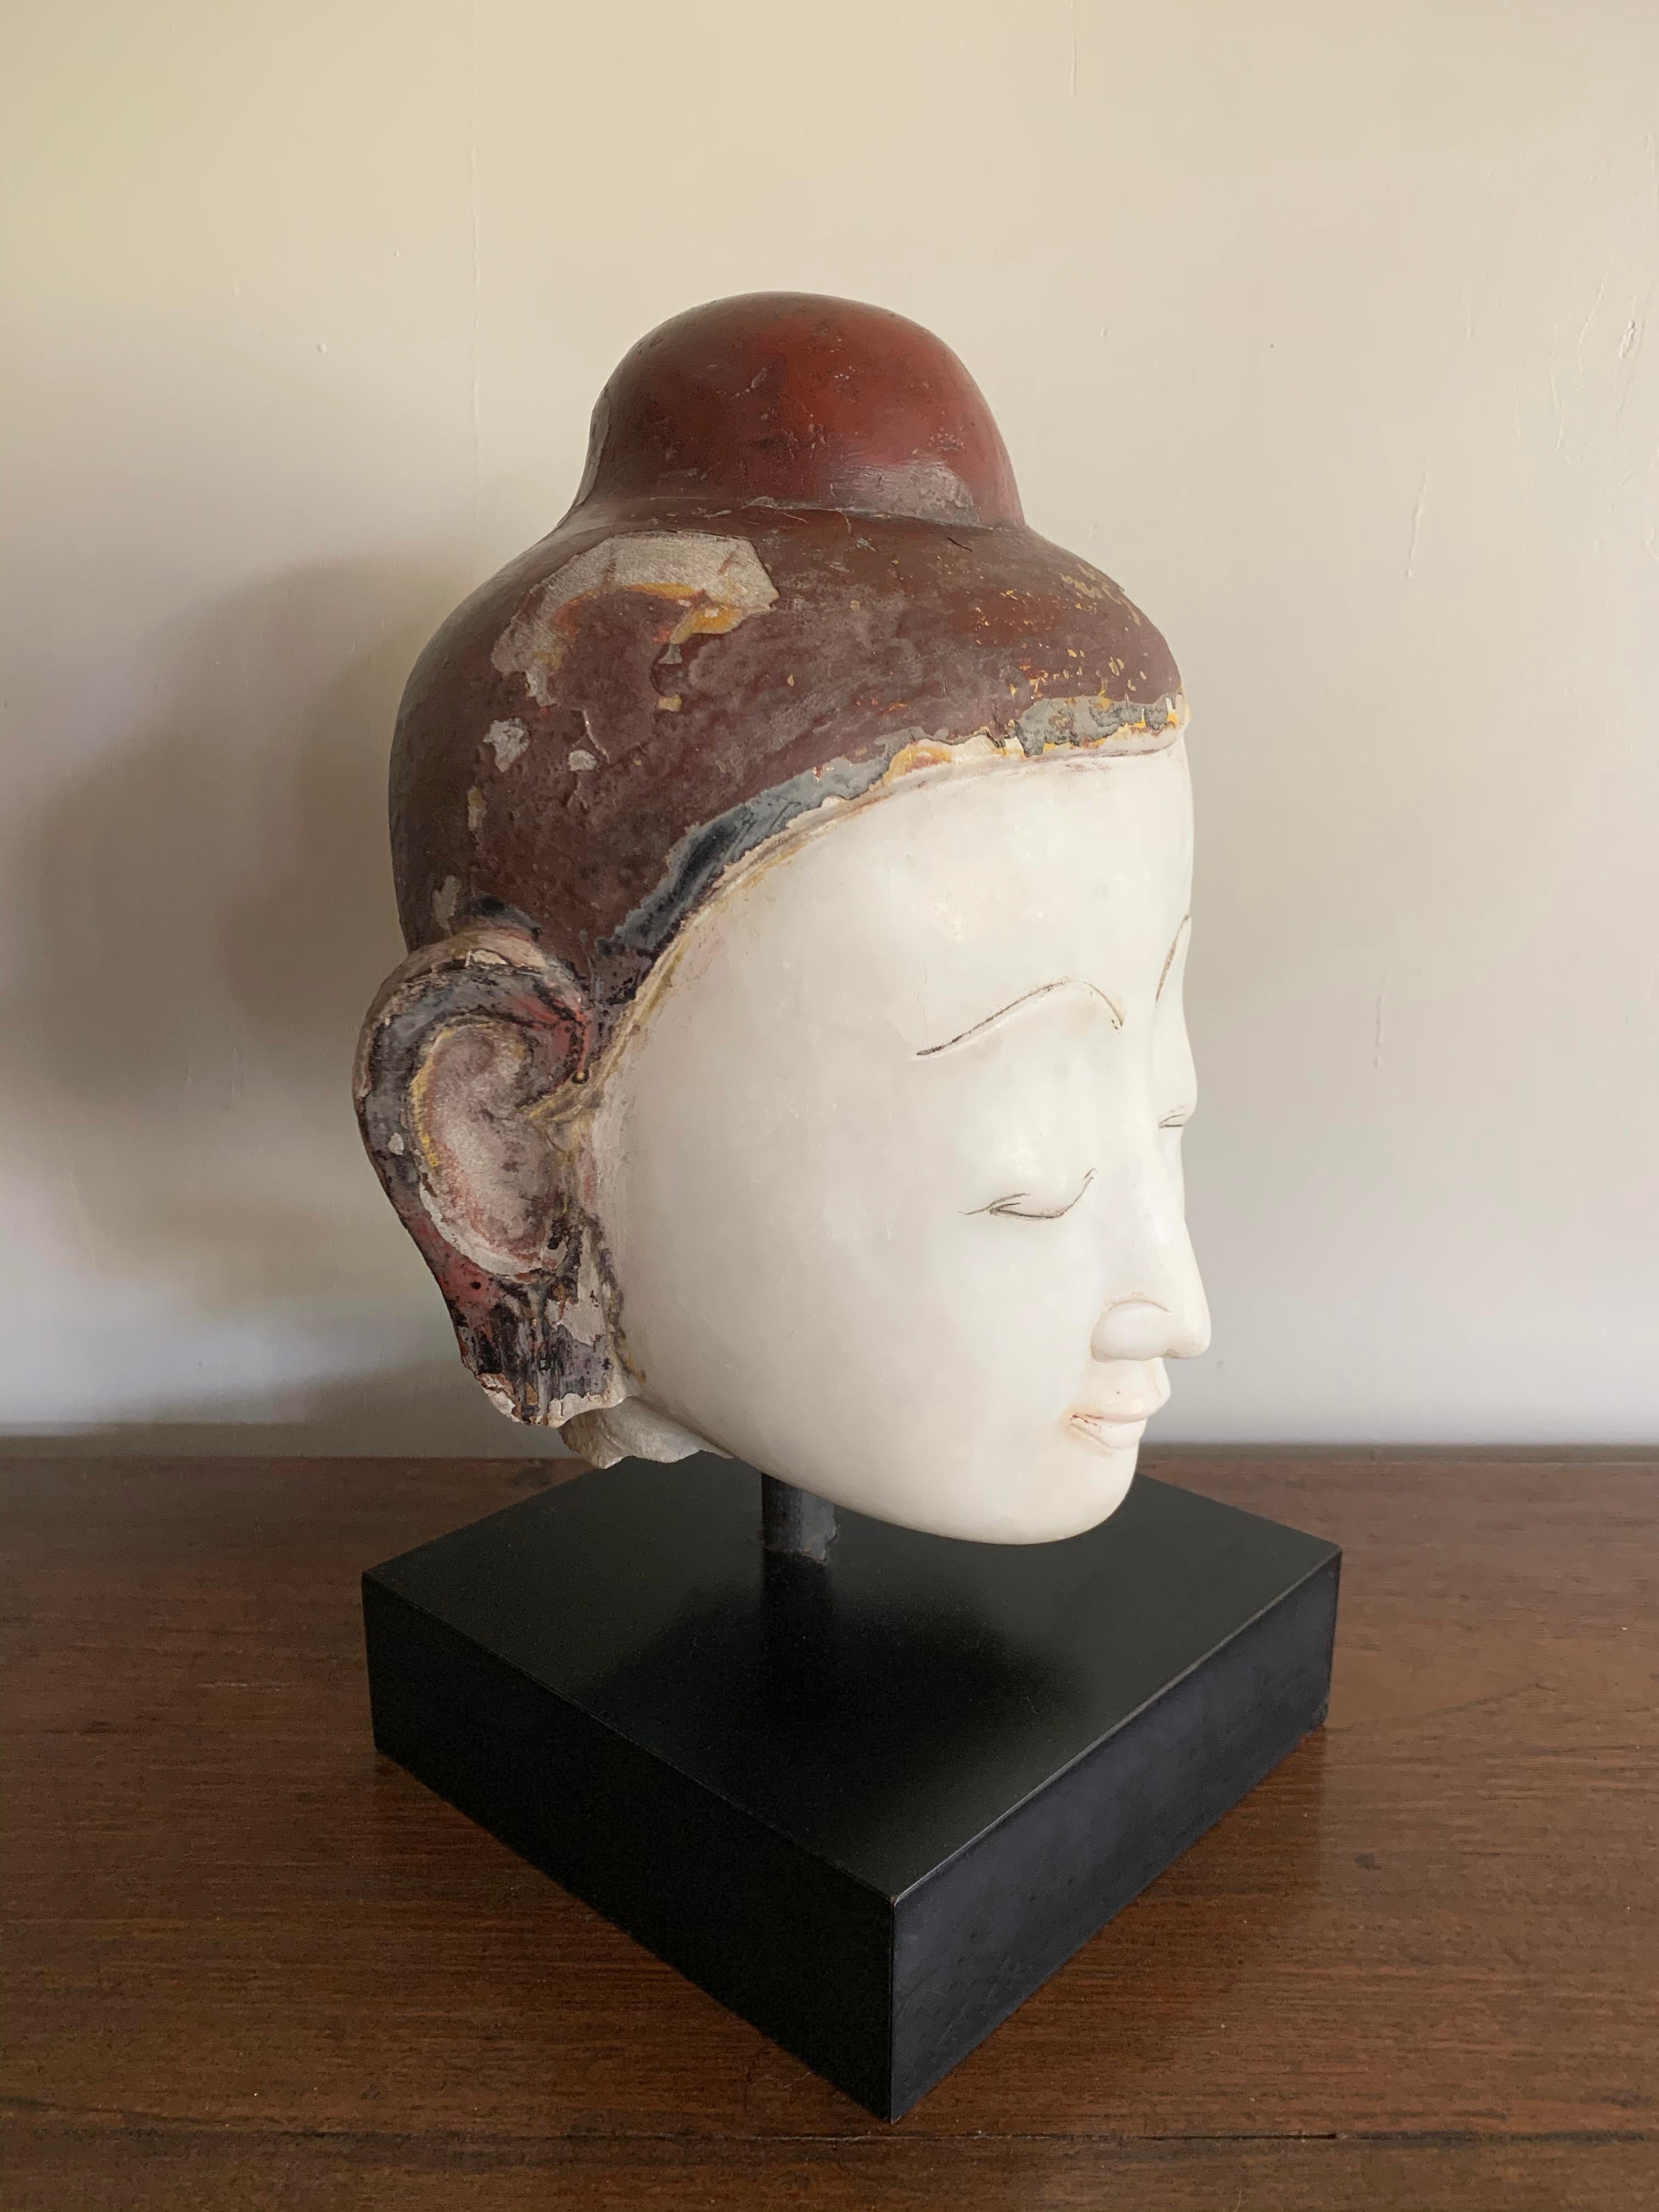 This stunning life-sized marble head of the Buddha is from the Shan States of Burma and carved from a single block of white marble. The Buddha's round, moon like face features arched brows, a pointed nose and closed eyes. The face is framed by